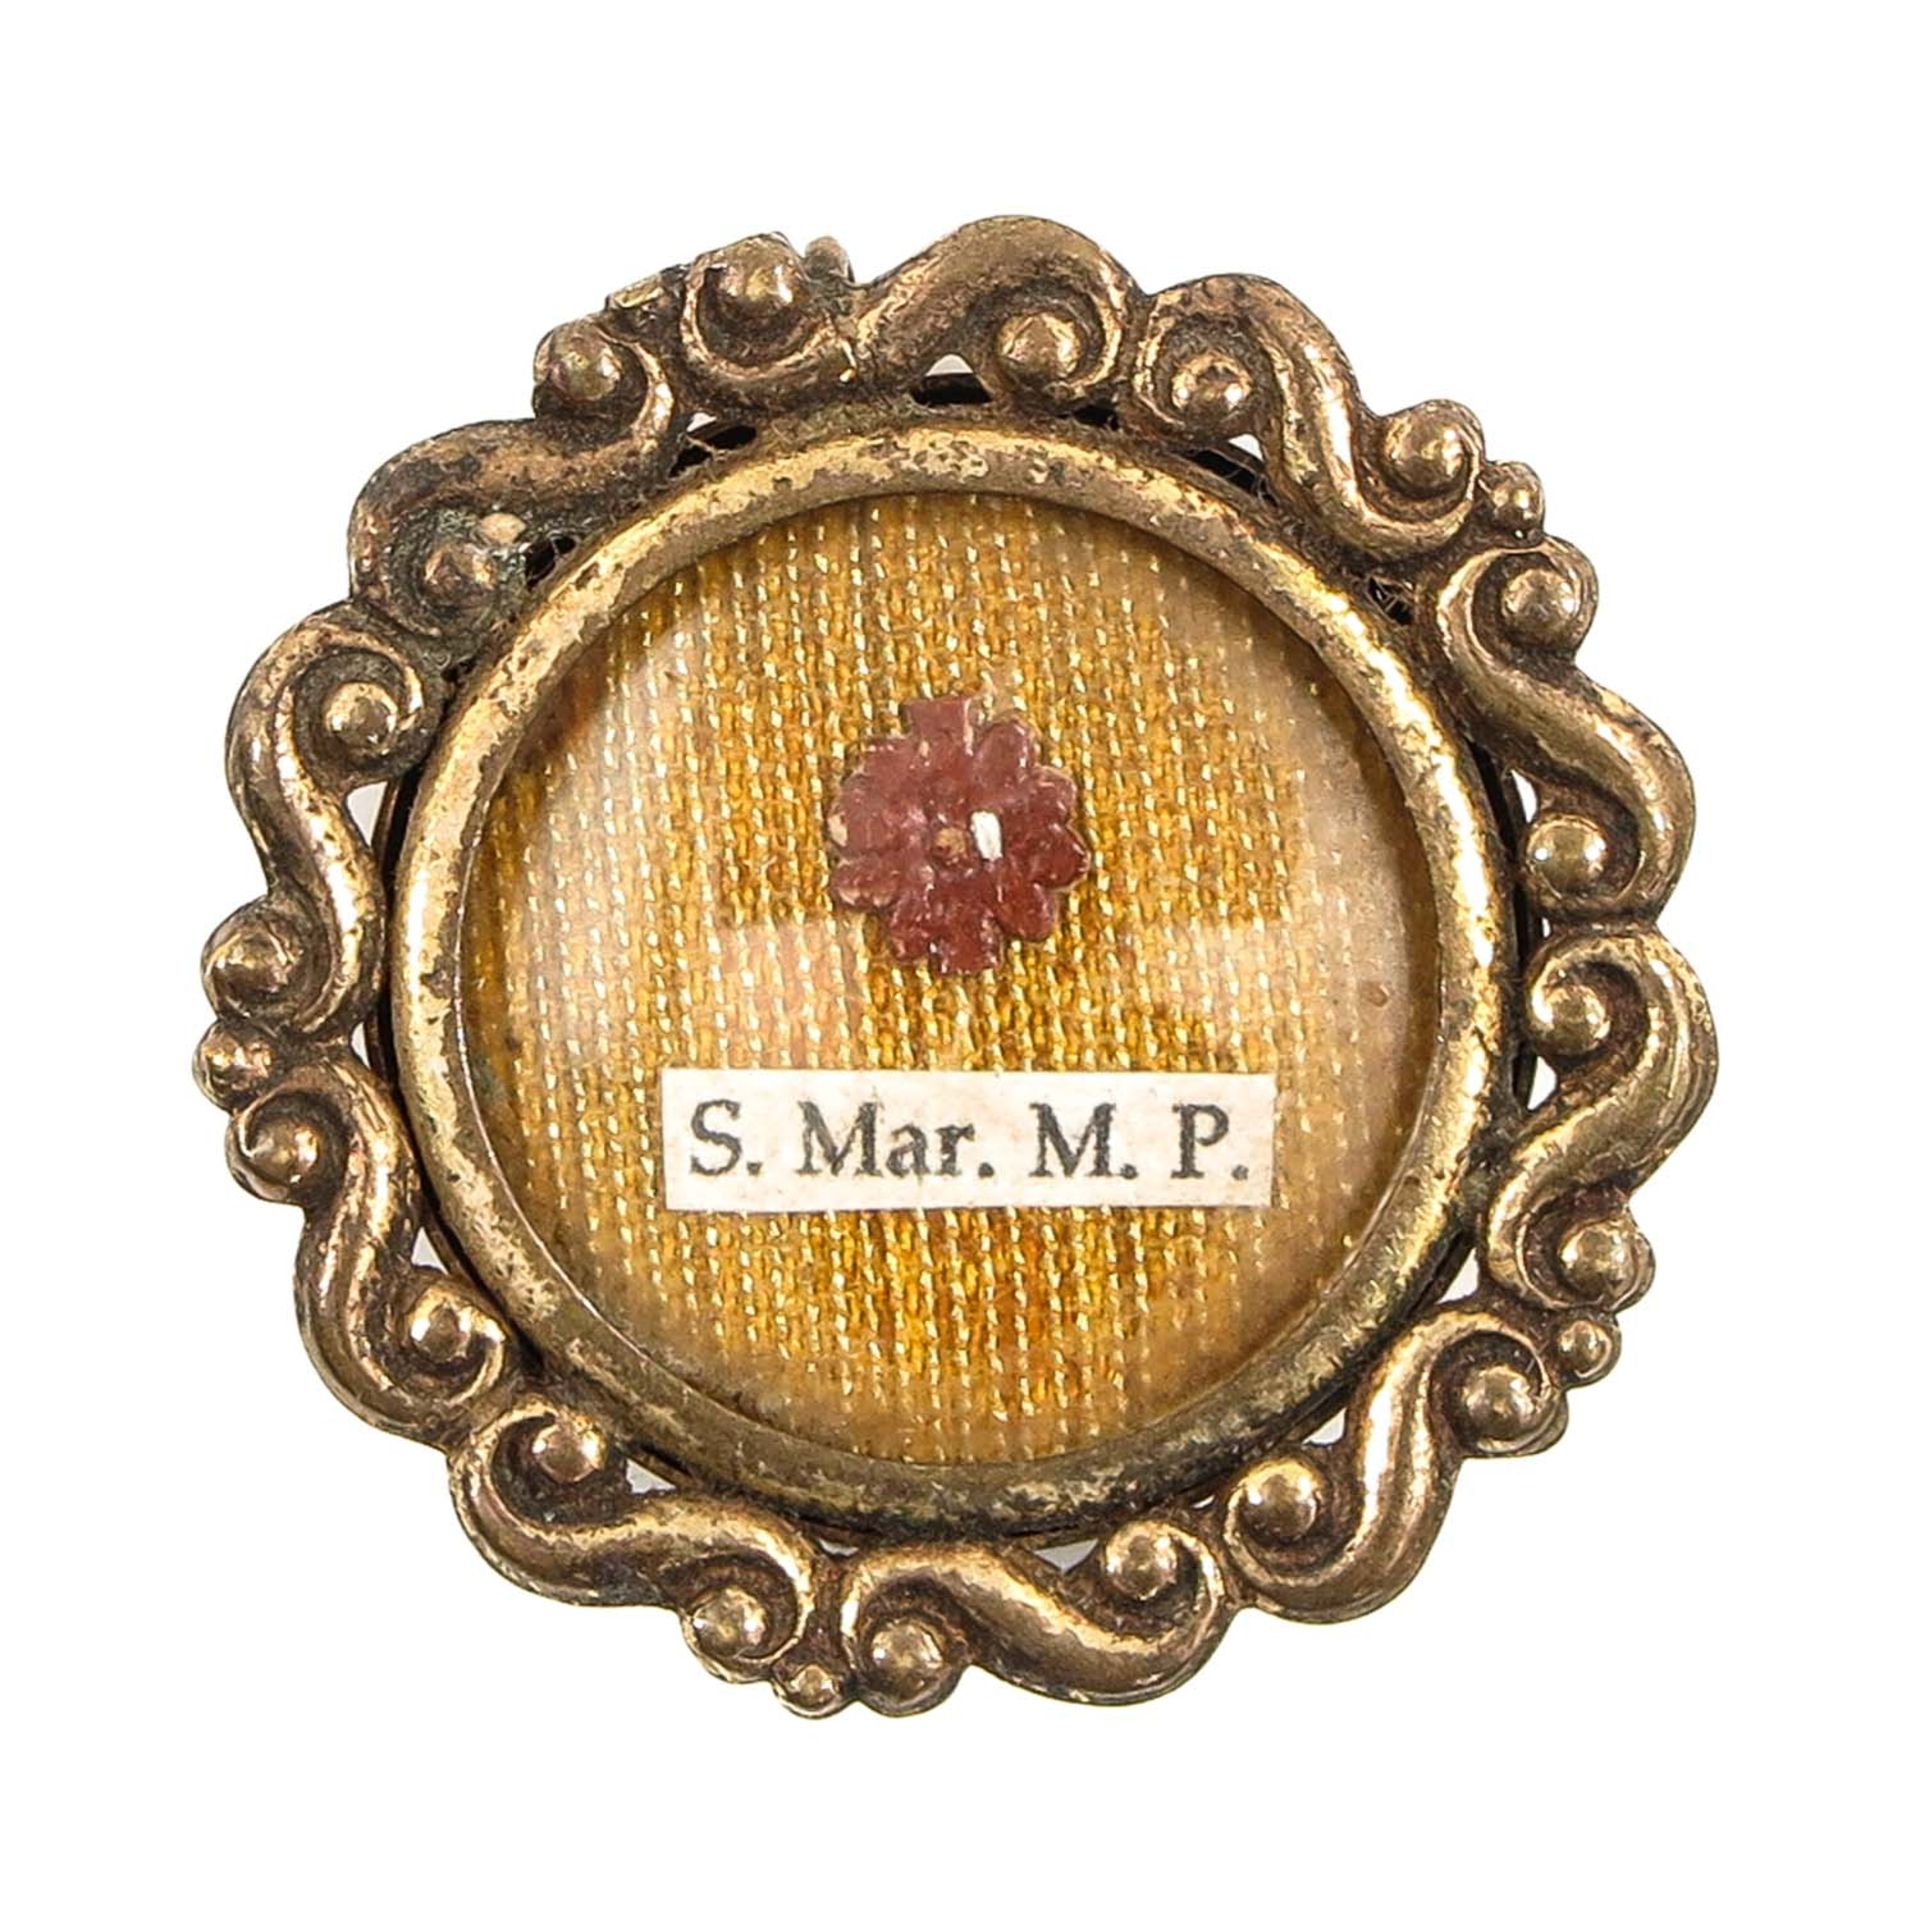 A Relic Holder with Relic of Saint Maria Magdalena with Certificate